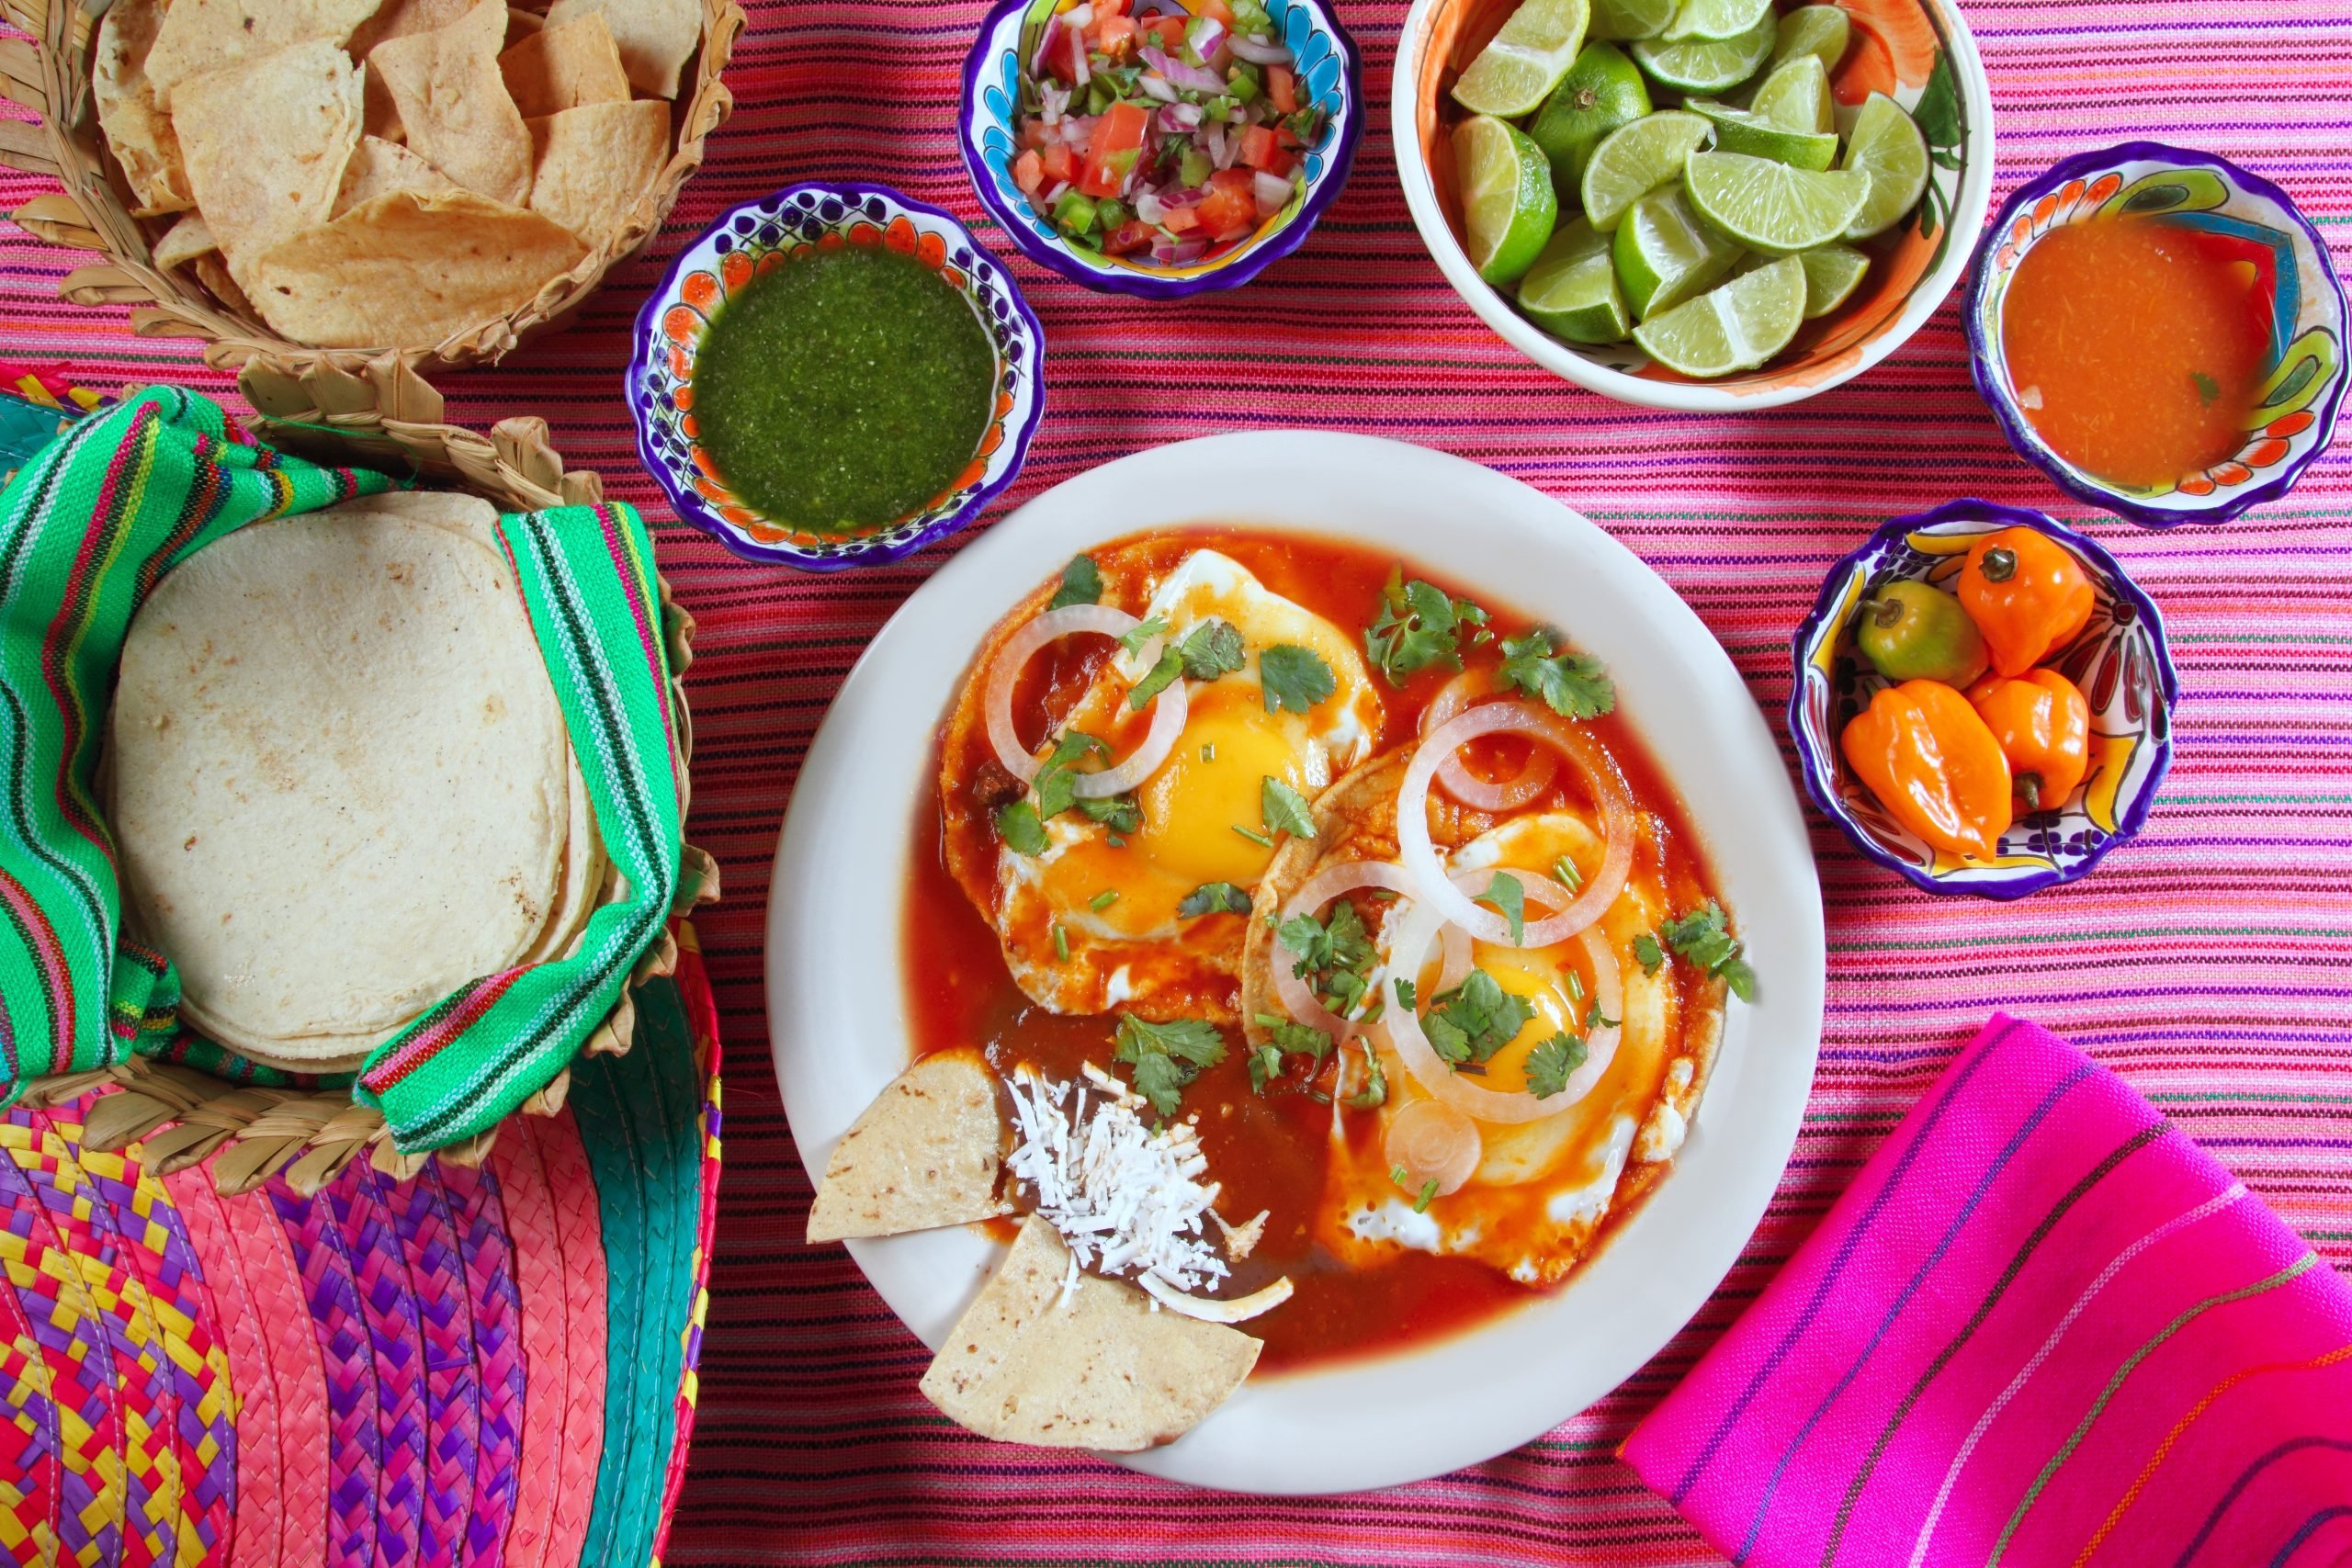 Huevos agorhados as seen from above on a pink tablecloth surrounded by sides during a breakfast in Mexico